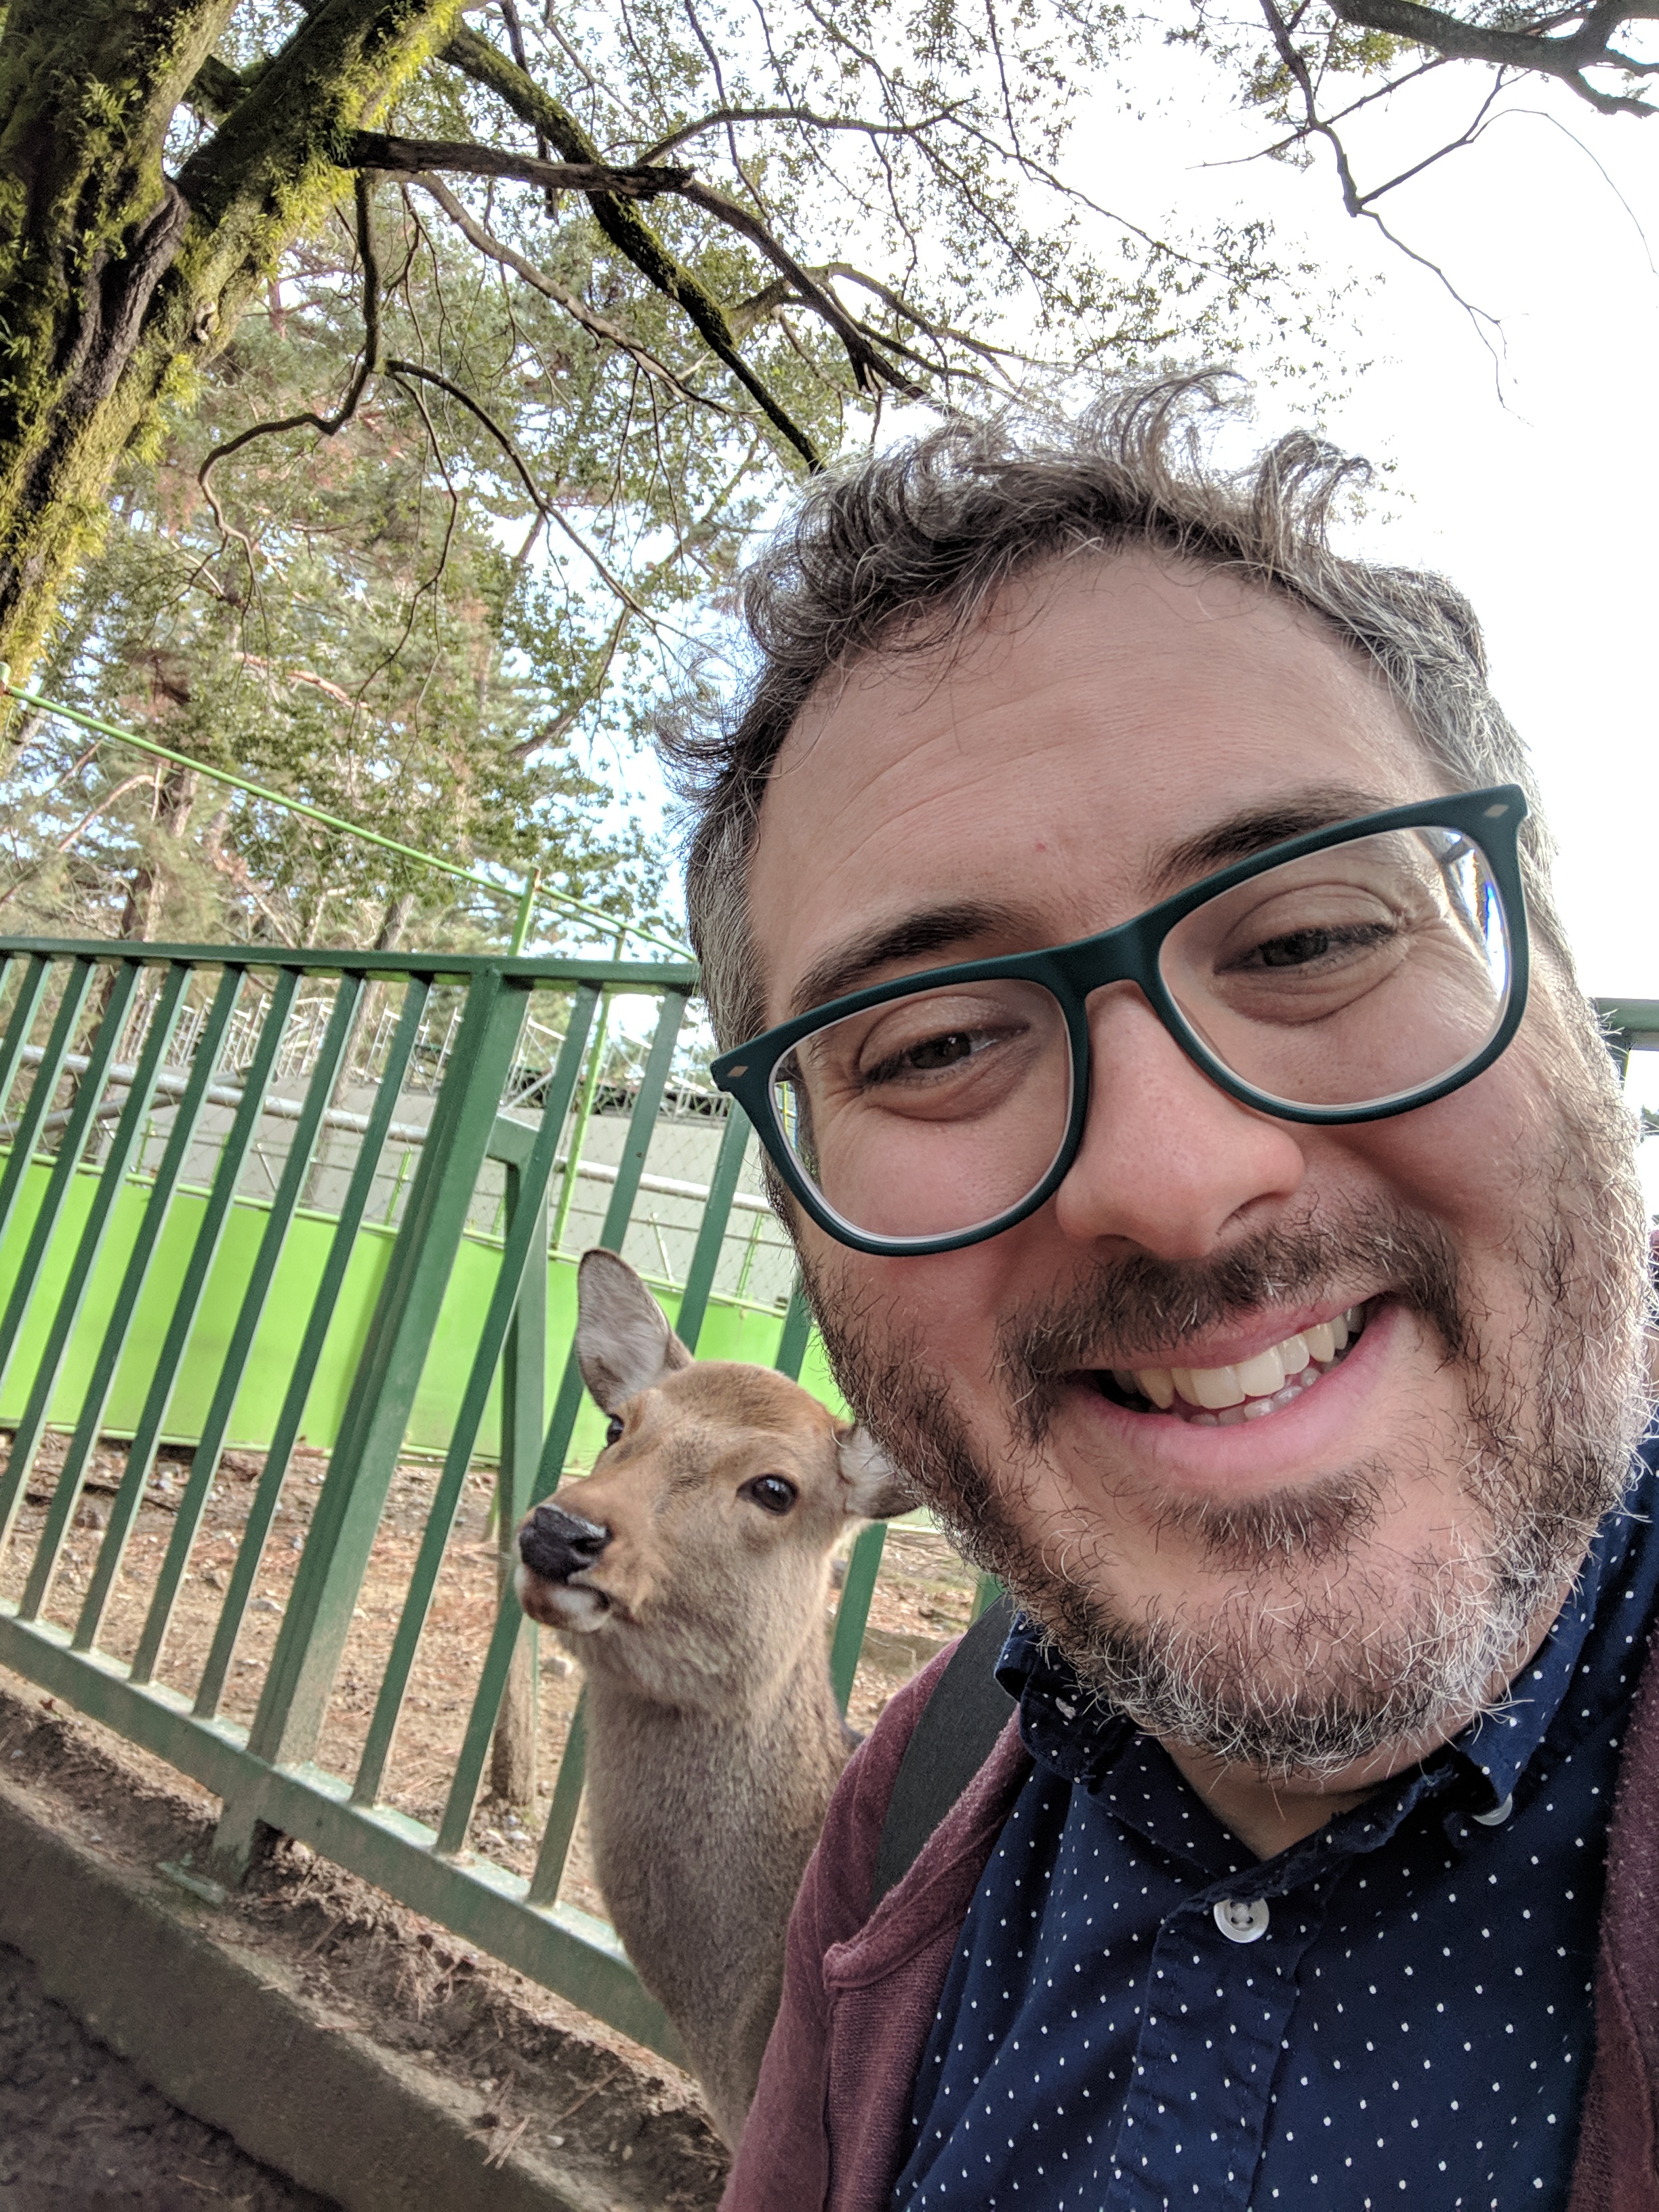 Man smiling with a deer close behind him